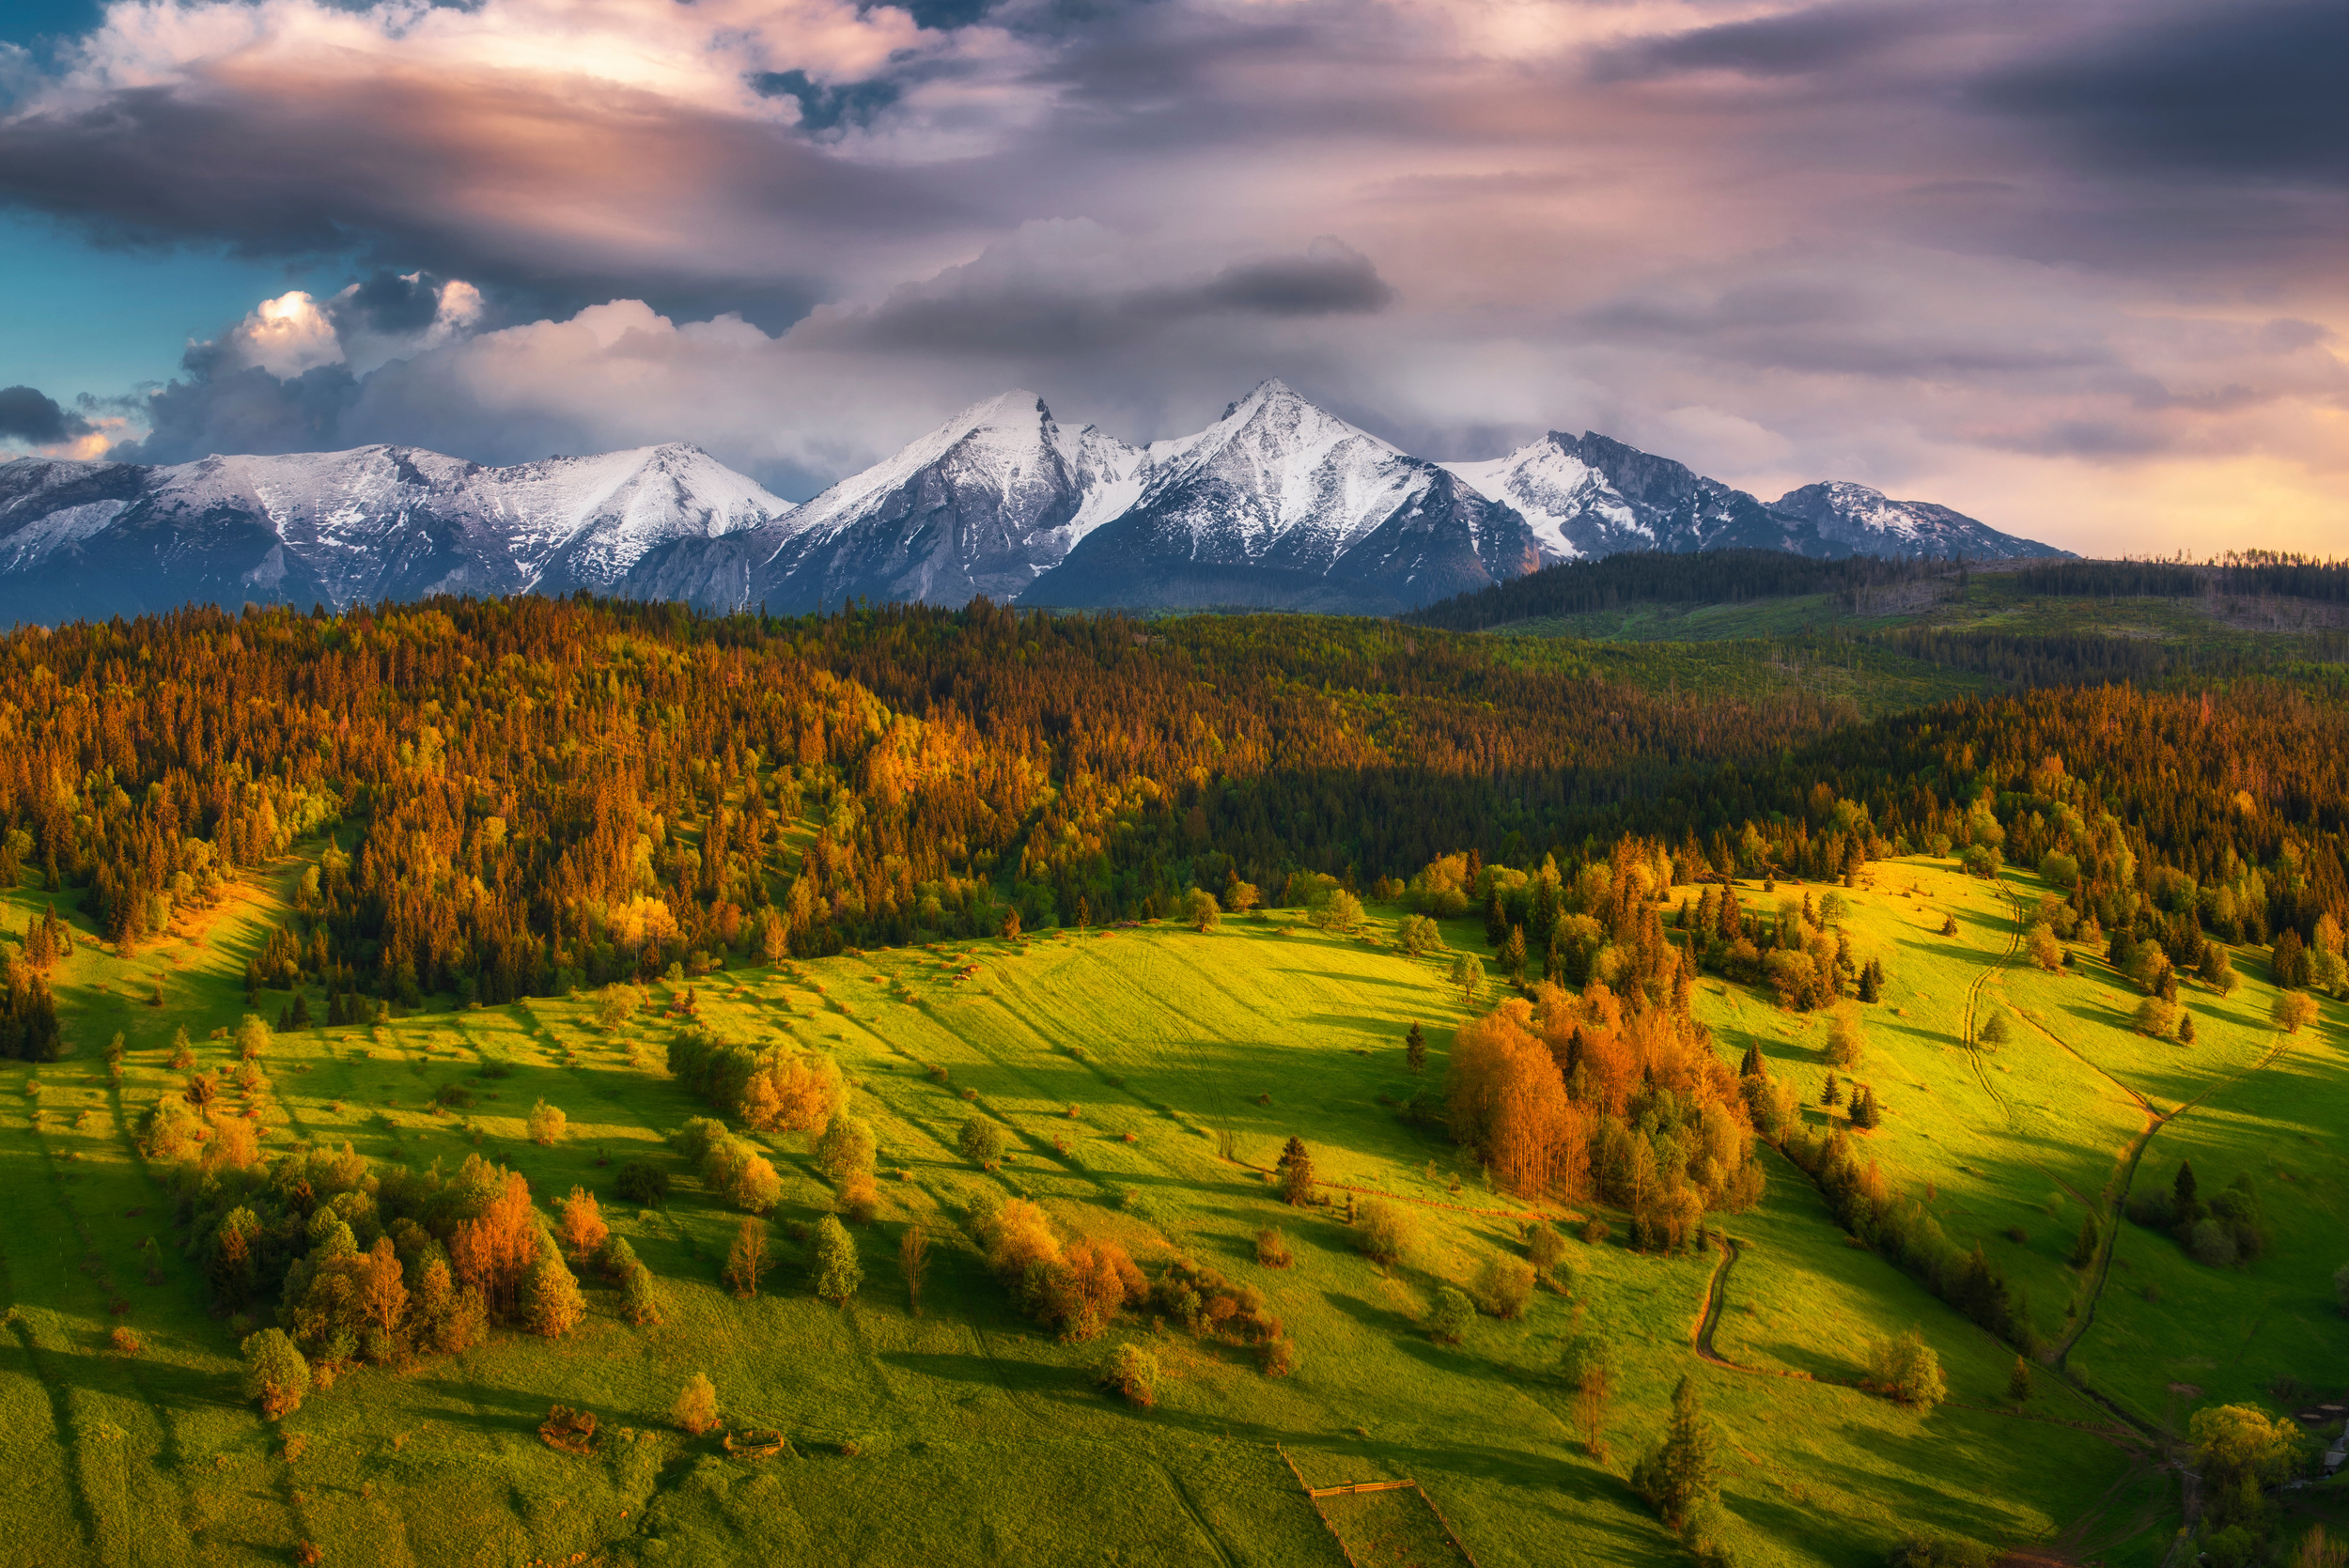 <p>Slovakia isn’t well known by any means, but this country nestled between Hungary, Poland, Austria, and Czechia is a fantastic place to trek, particularly in the Tatras Mountains in the northeast. Travelers will enjoy trails that rival those in the Alps but for a much more affordable price.</p><p><a href='https://www.msn.com/en-us/community/channel/vid-cj9pqbr0vn9in2b6ddcd8sfgpfq6x6utp44fssrv6mc2gtybw0us'>Follow us on MSN to see more of our exclusive lifestyle content.</a></p>